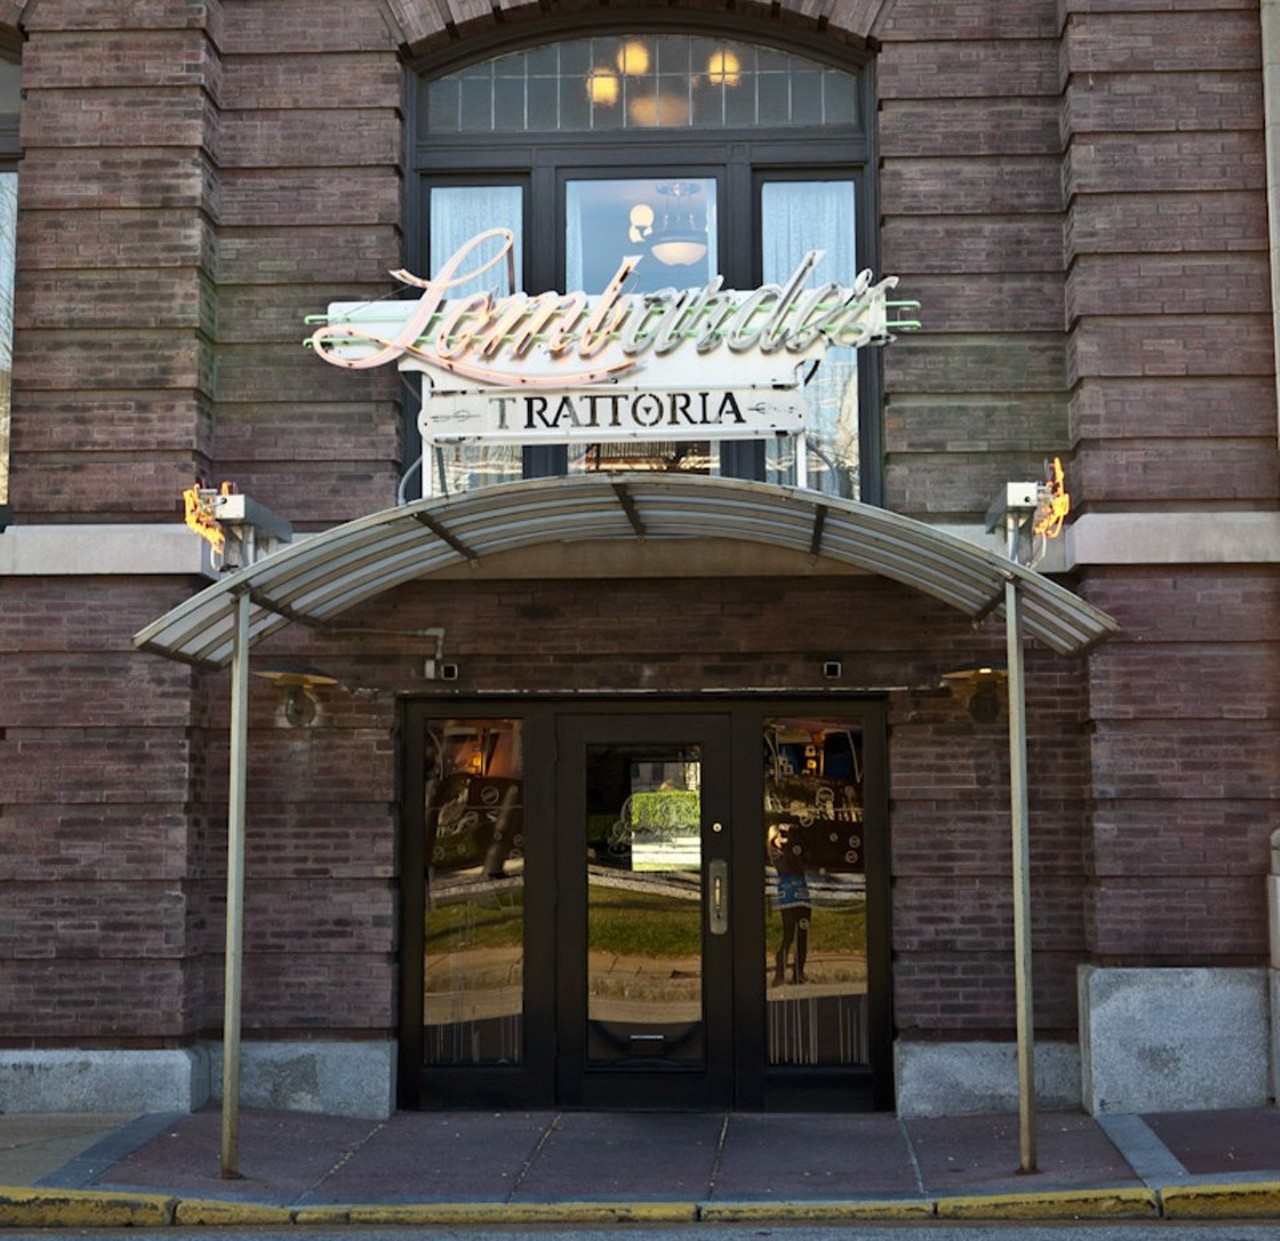 Lombardo&#146;s Trattoria
201 S 20th Street
&#147;An excellent hidden gem,&#148; according to Emily W. Lombardo&#146;s Trattoria serves as a steakhouse and Italian joint. 
Photo credit: RFT File Photo